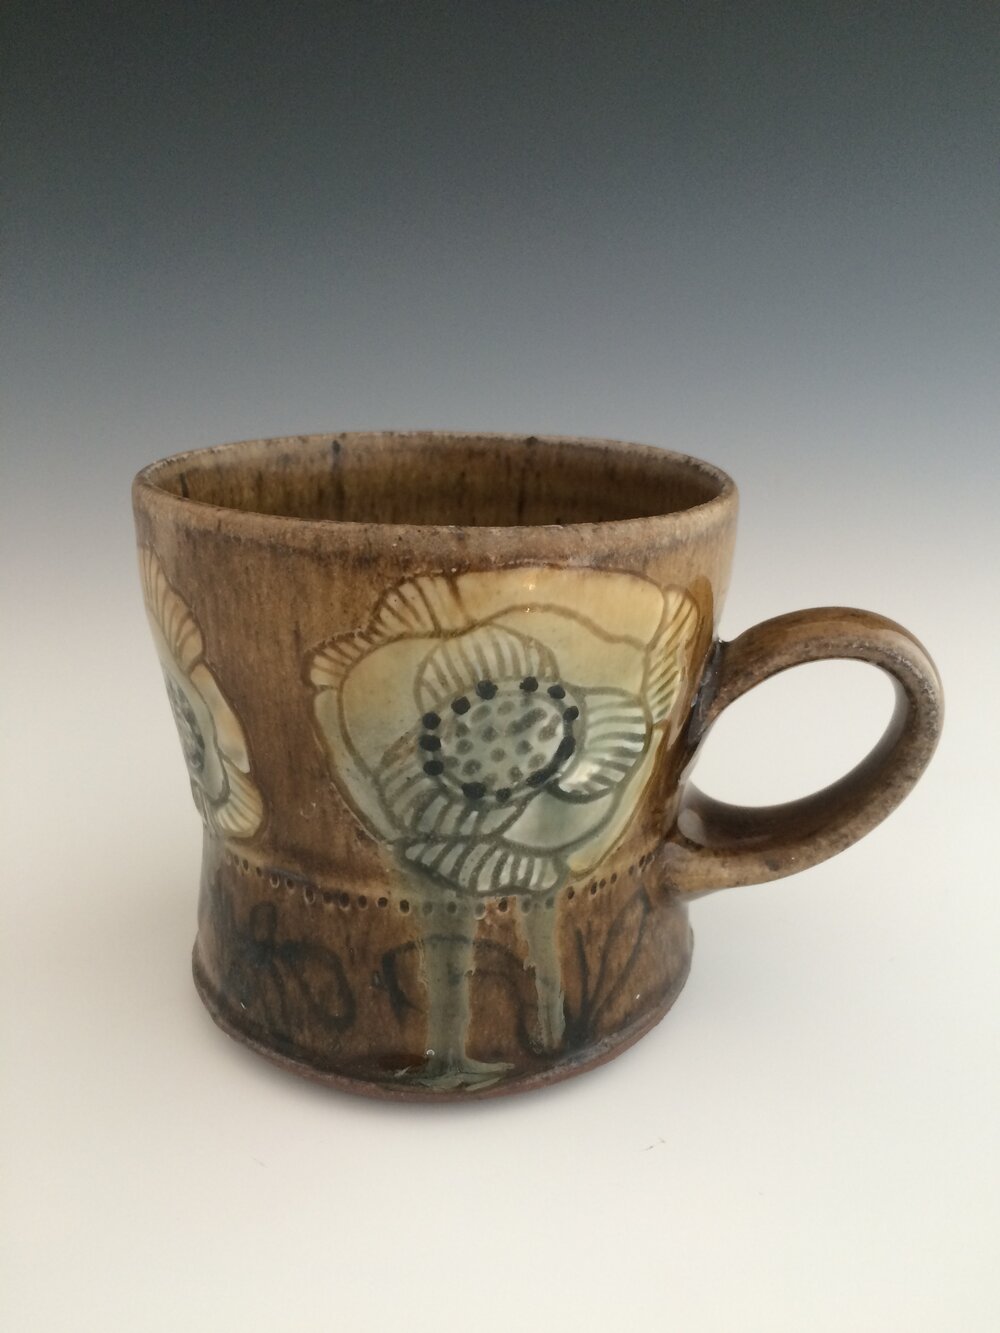 Cup also made during my summer at Anderson Ranch Arts Center 2015